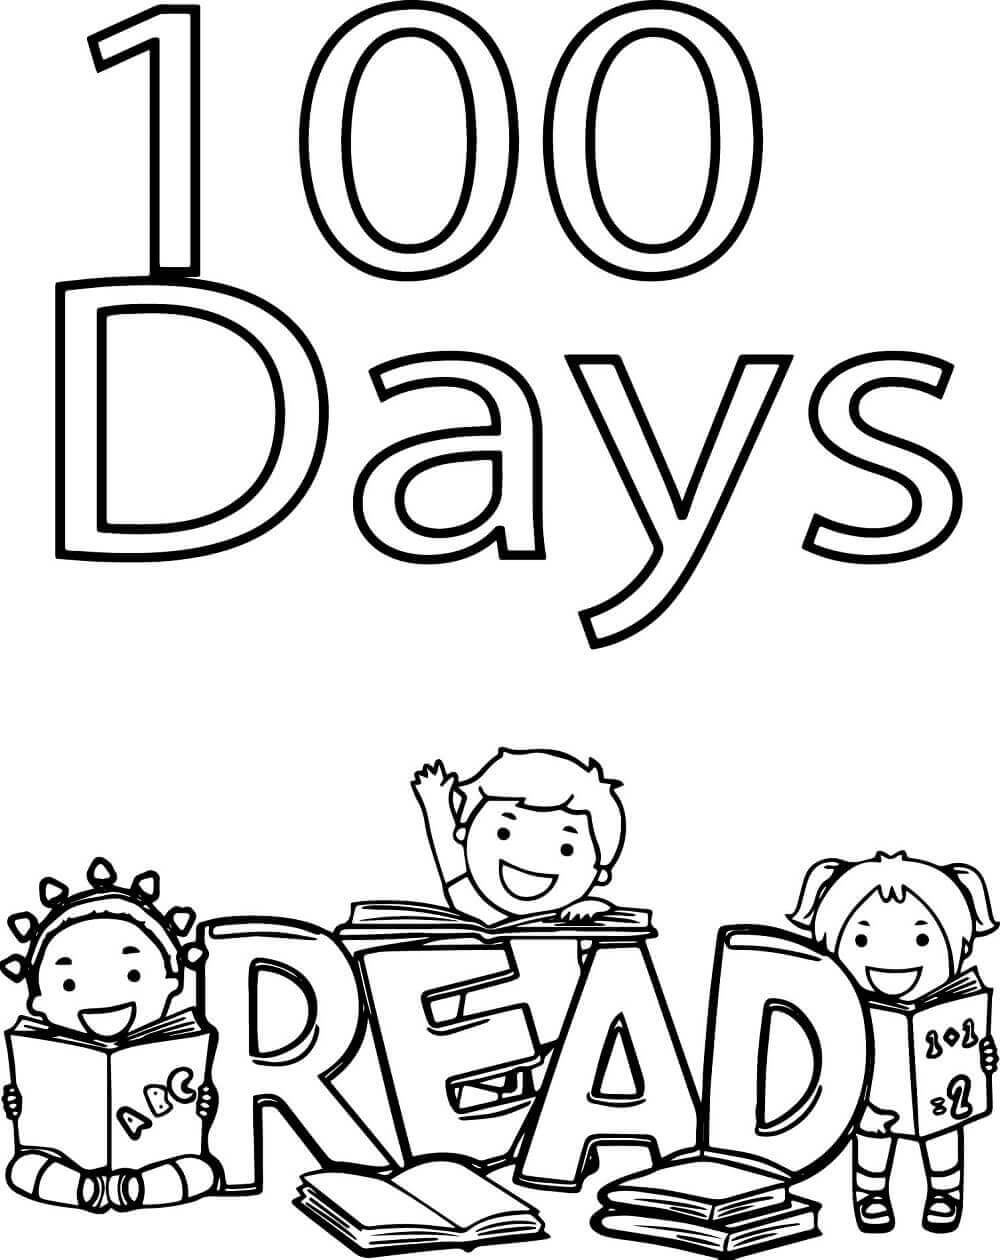 100-days-of-school-coloring-pages-coloring-home